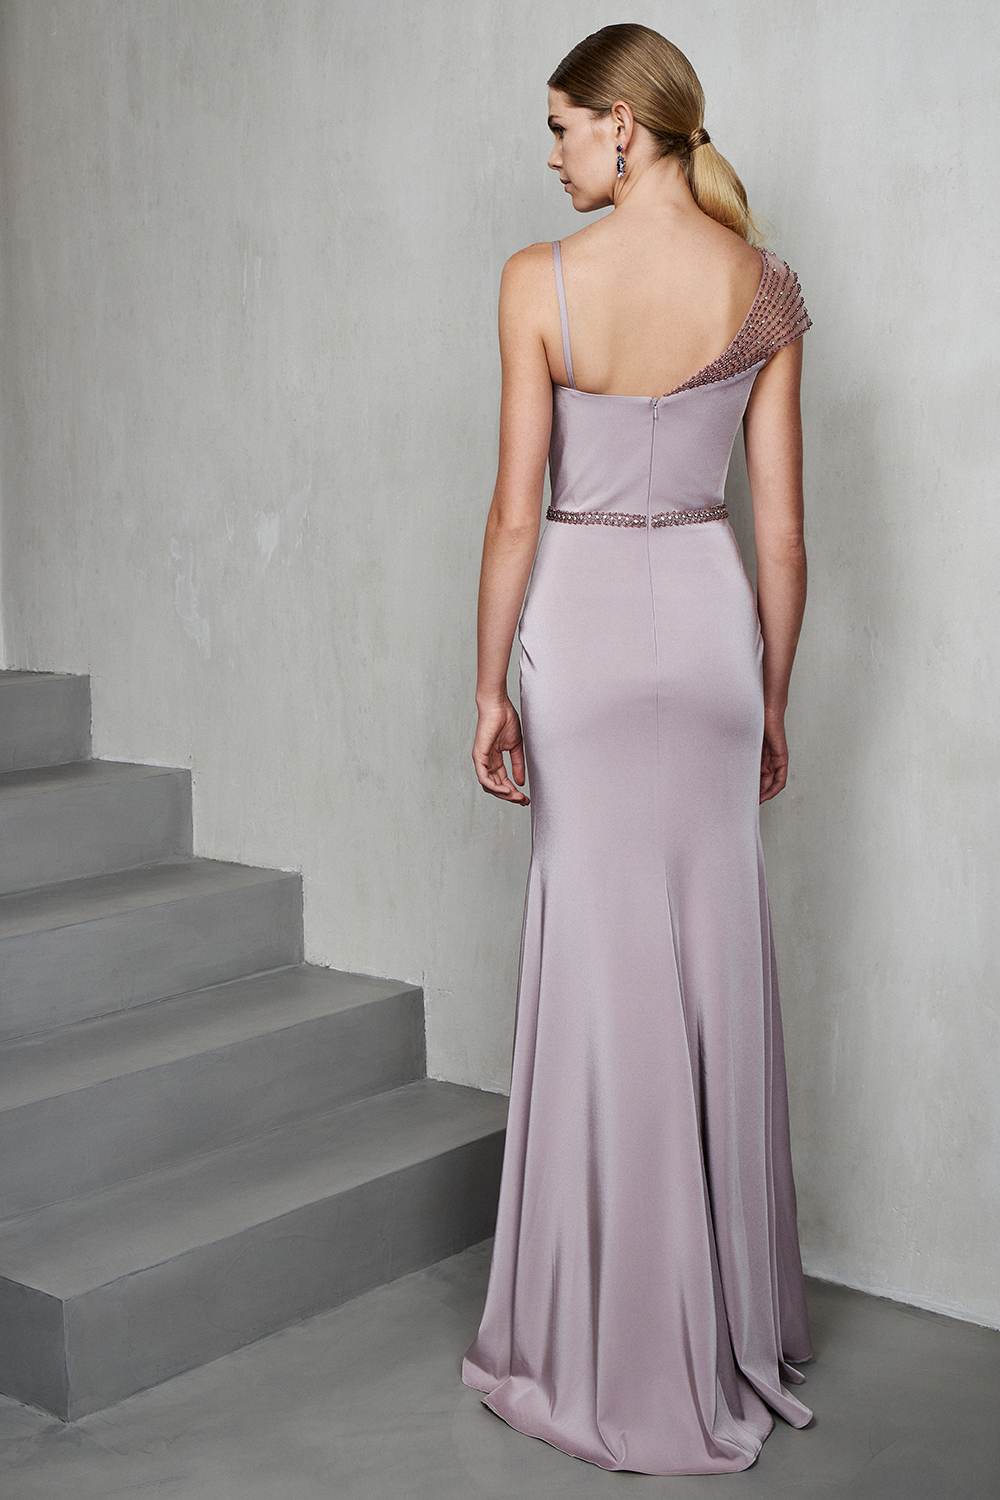 One shoulder long evening satin dress with beading and bow at the shoulder